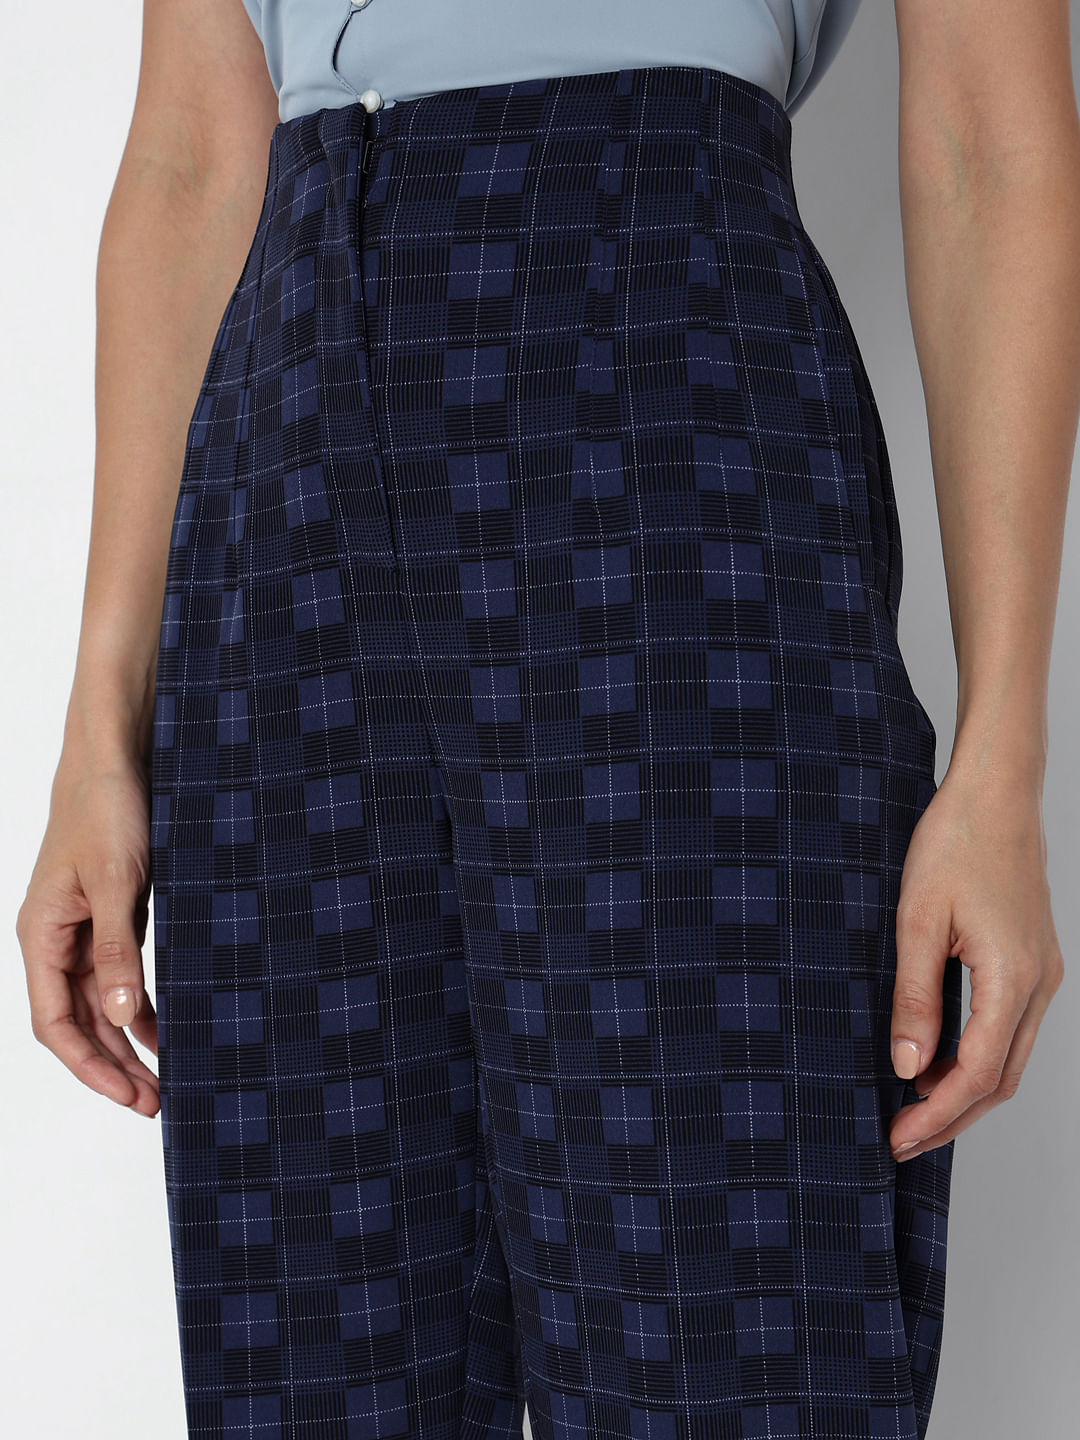 navy blue checked trousers - the school uniform